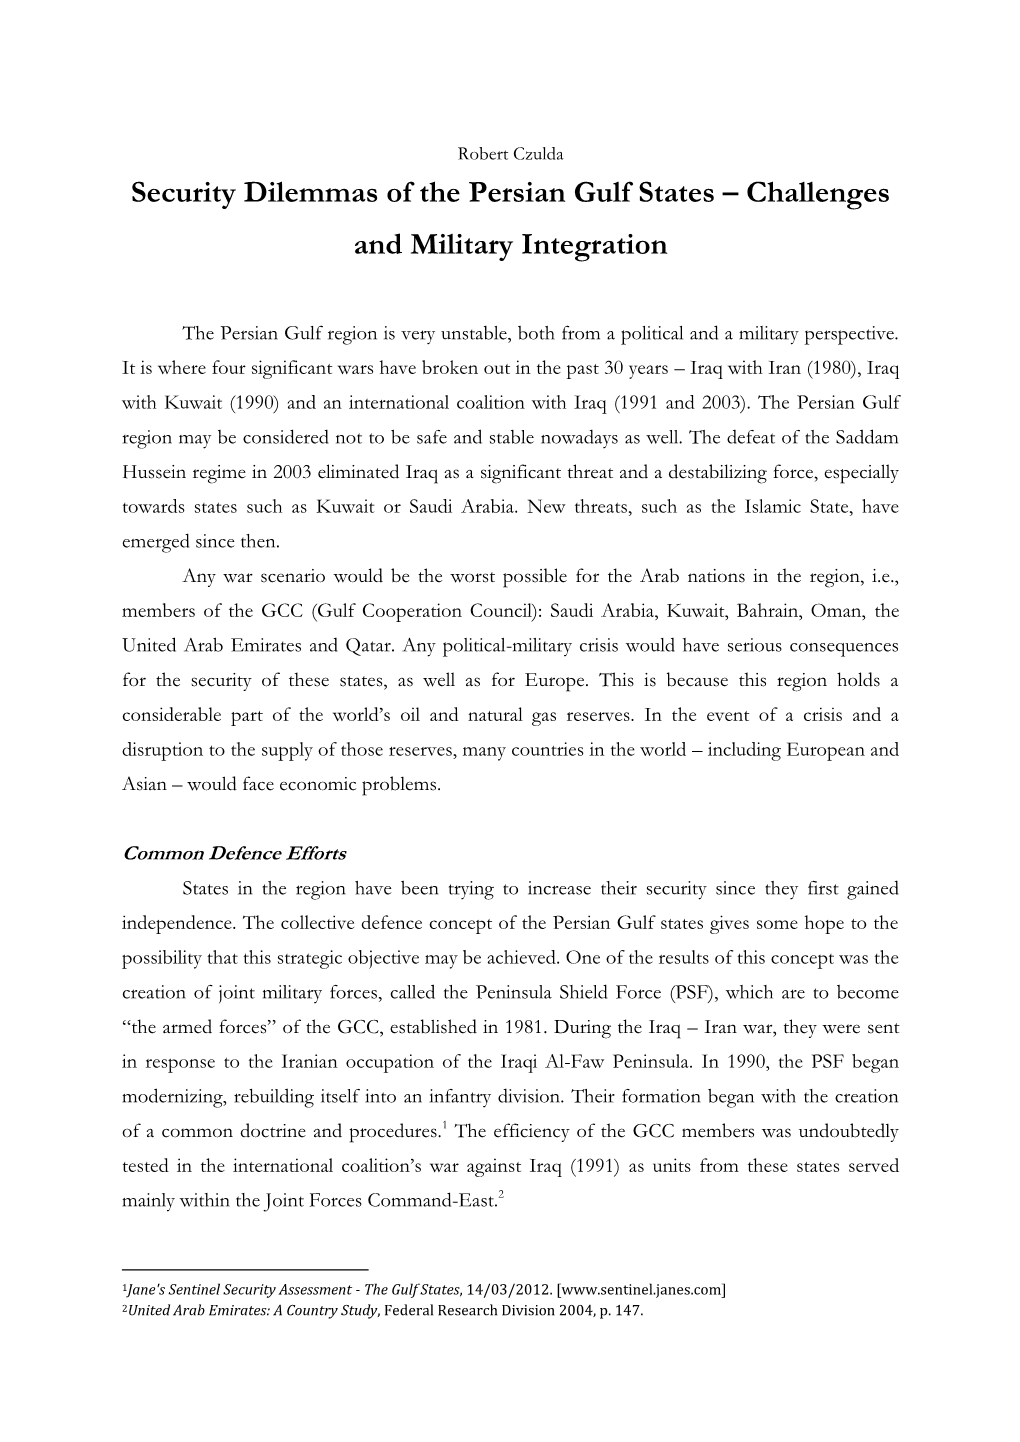 Security Dilemmas of the Persian Gulf States – Challenges and Military Integration